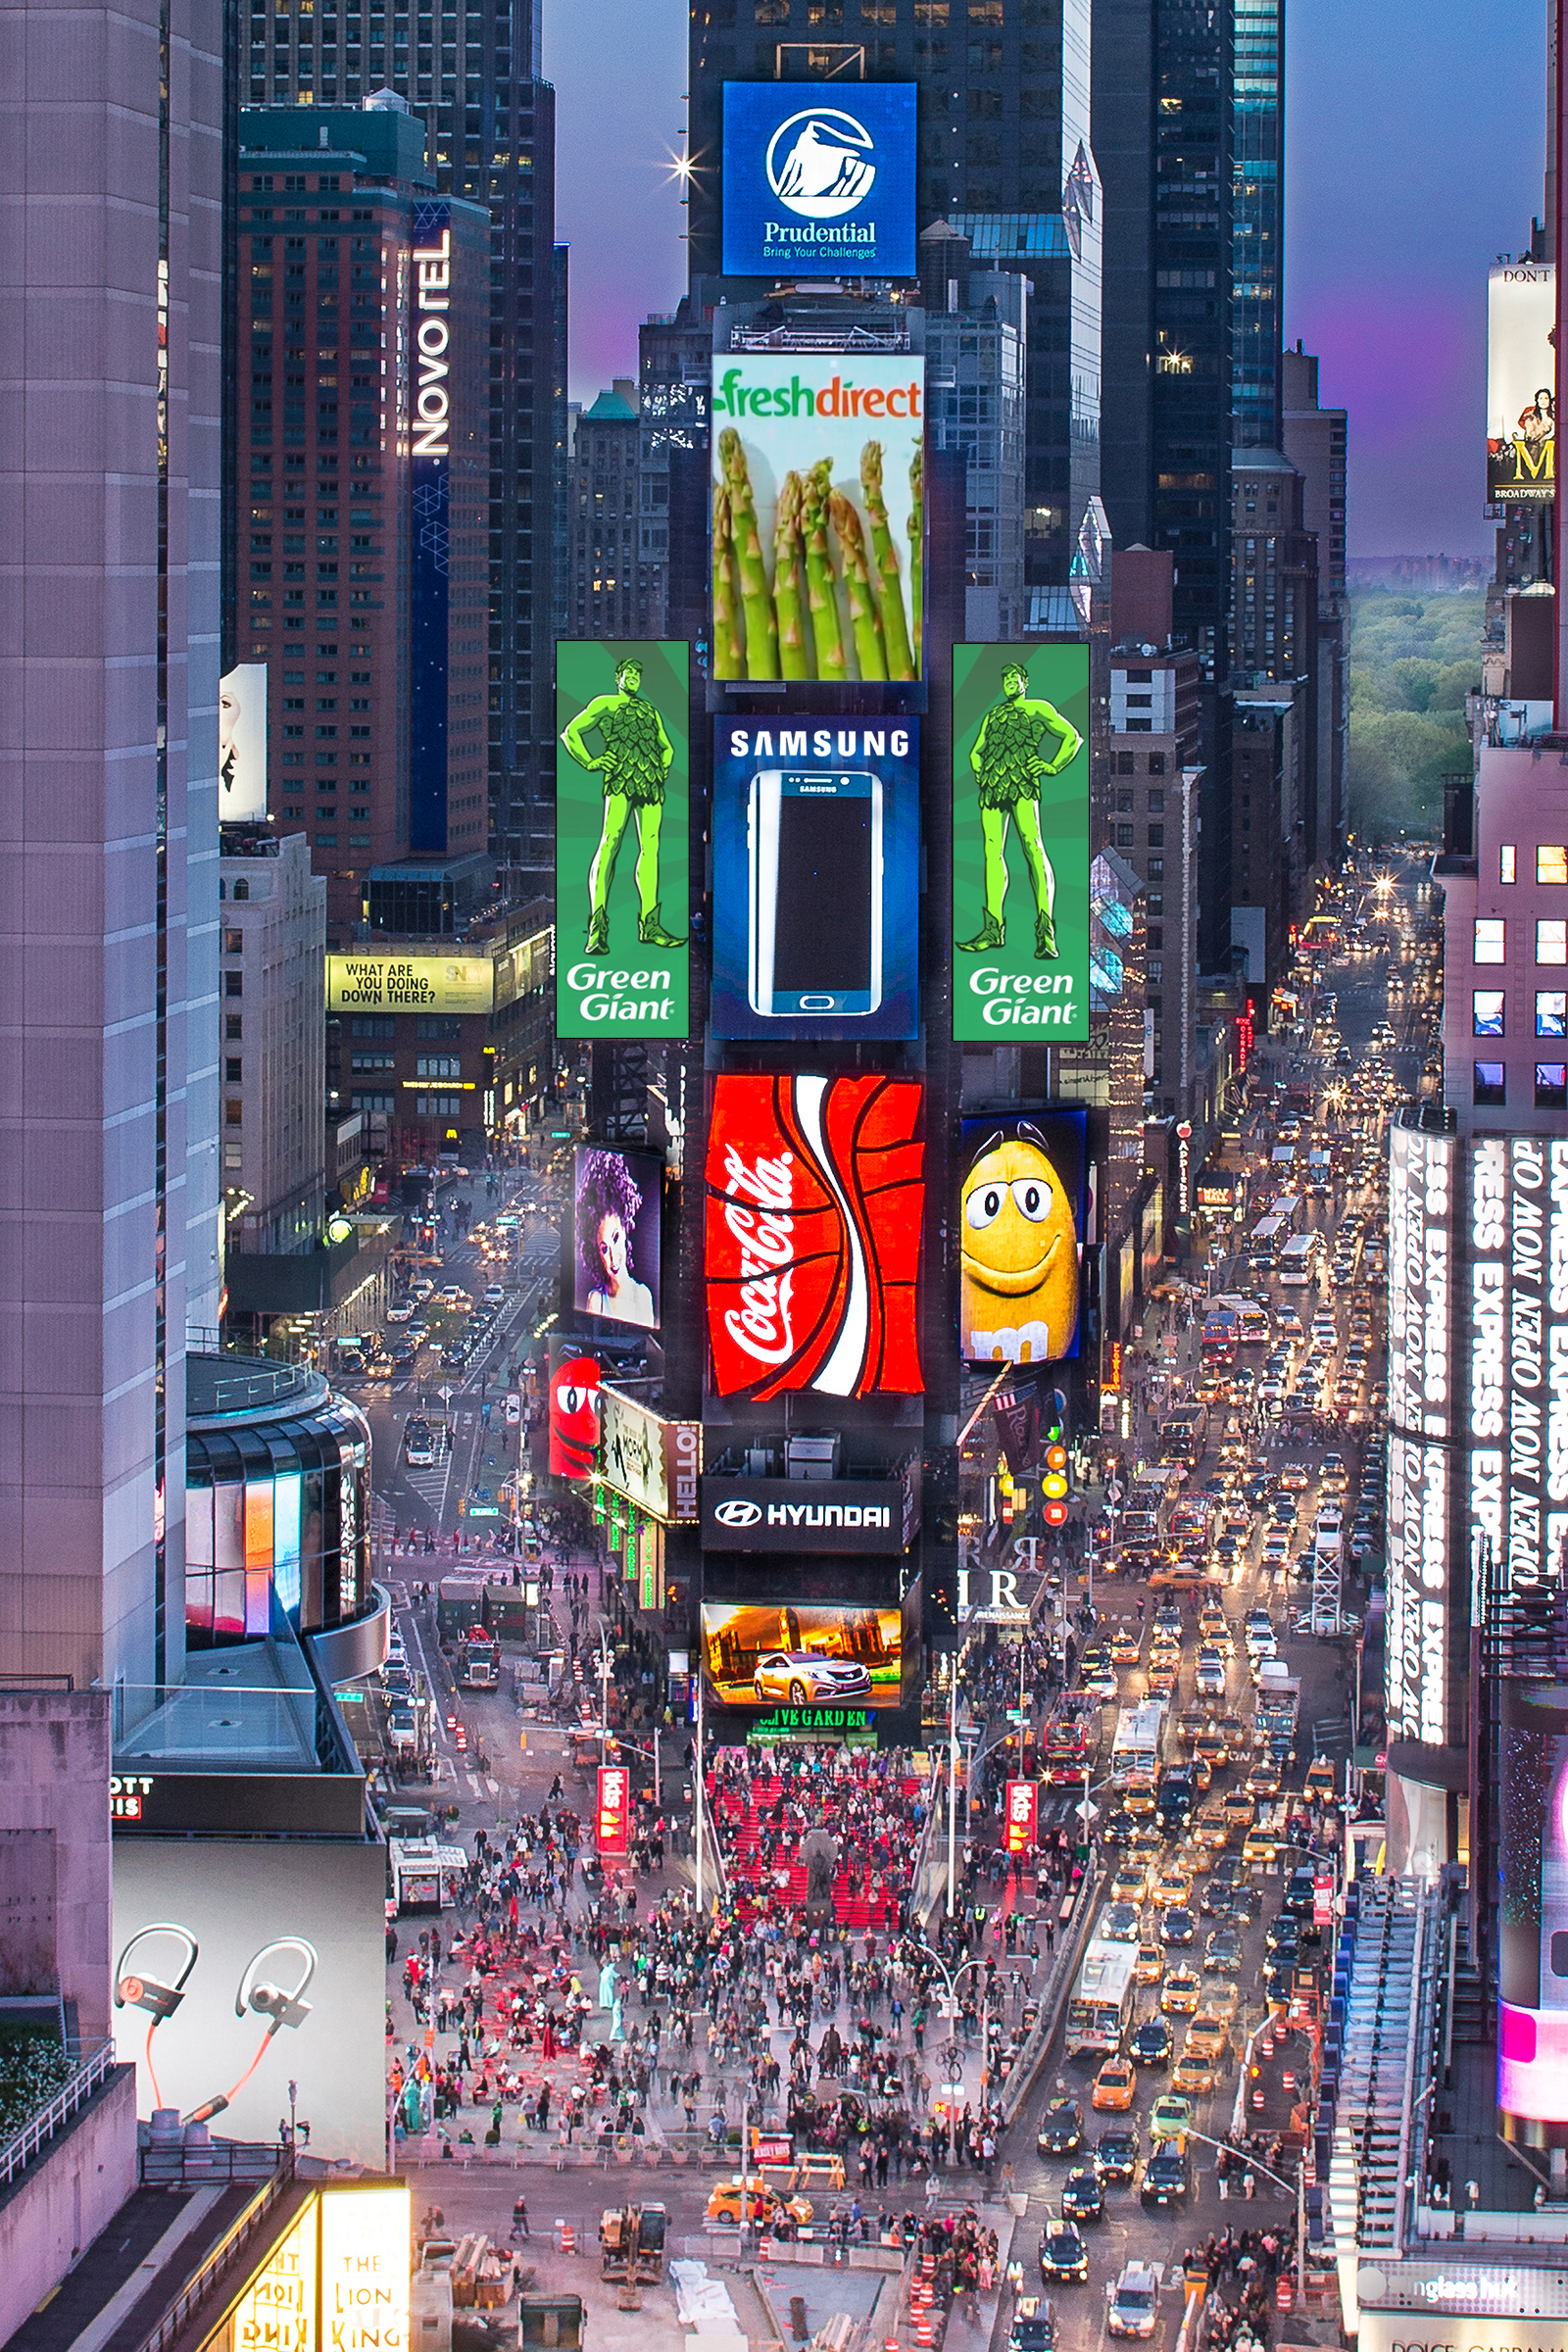 Year-Round Lease of Iconic Billboard in Times Square NYC Acquired by Private Equity Fund Providence